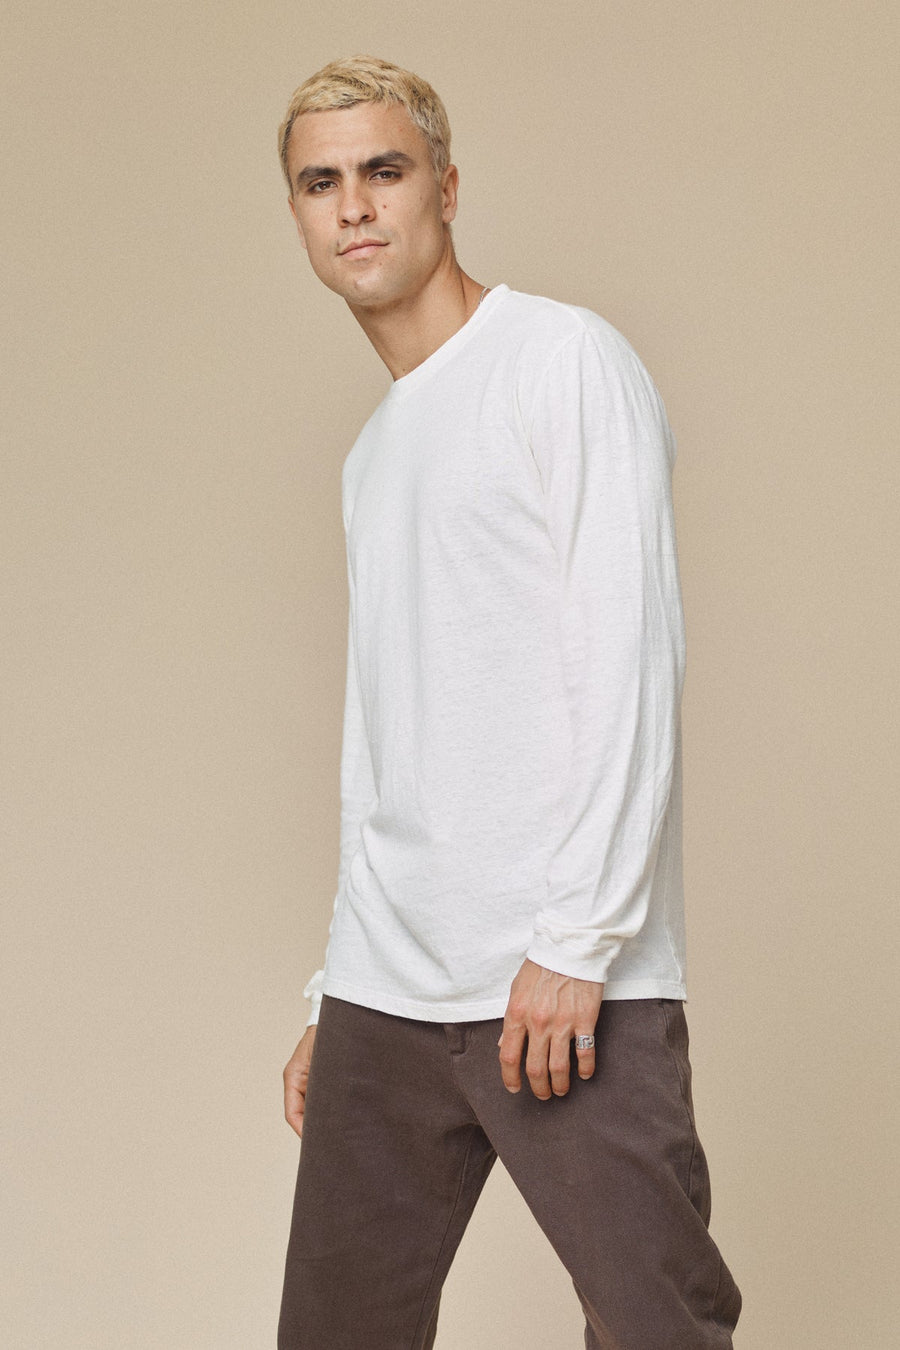 JUNG LONGSLEEVE TEE - WASHED WHITE